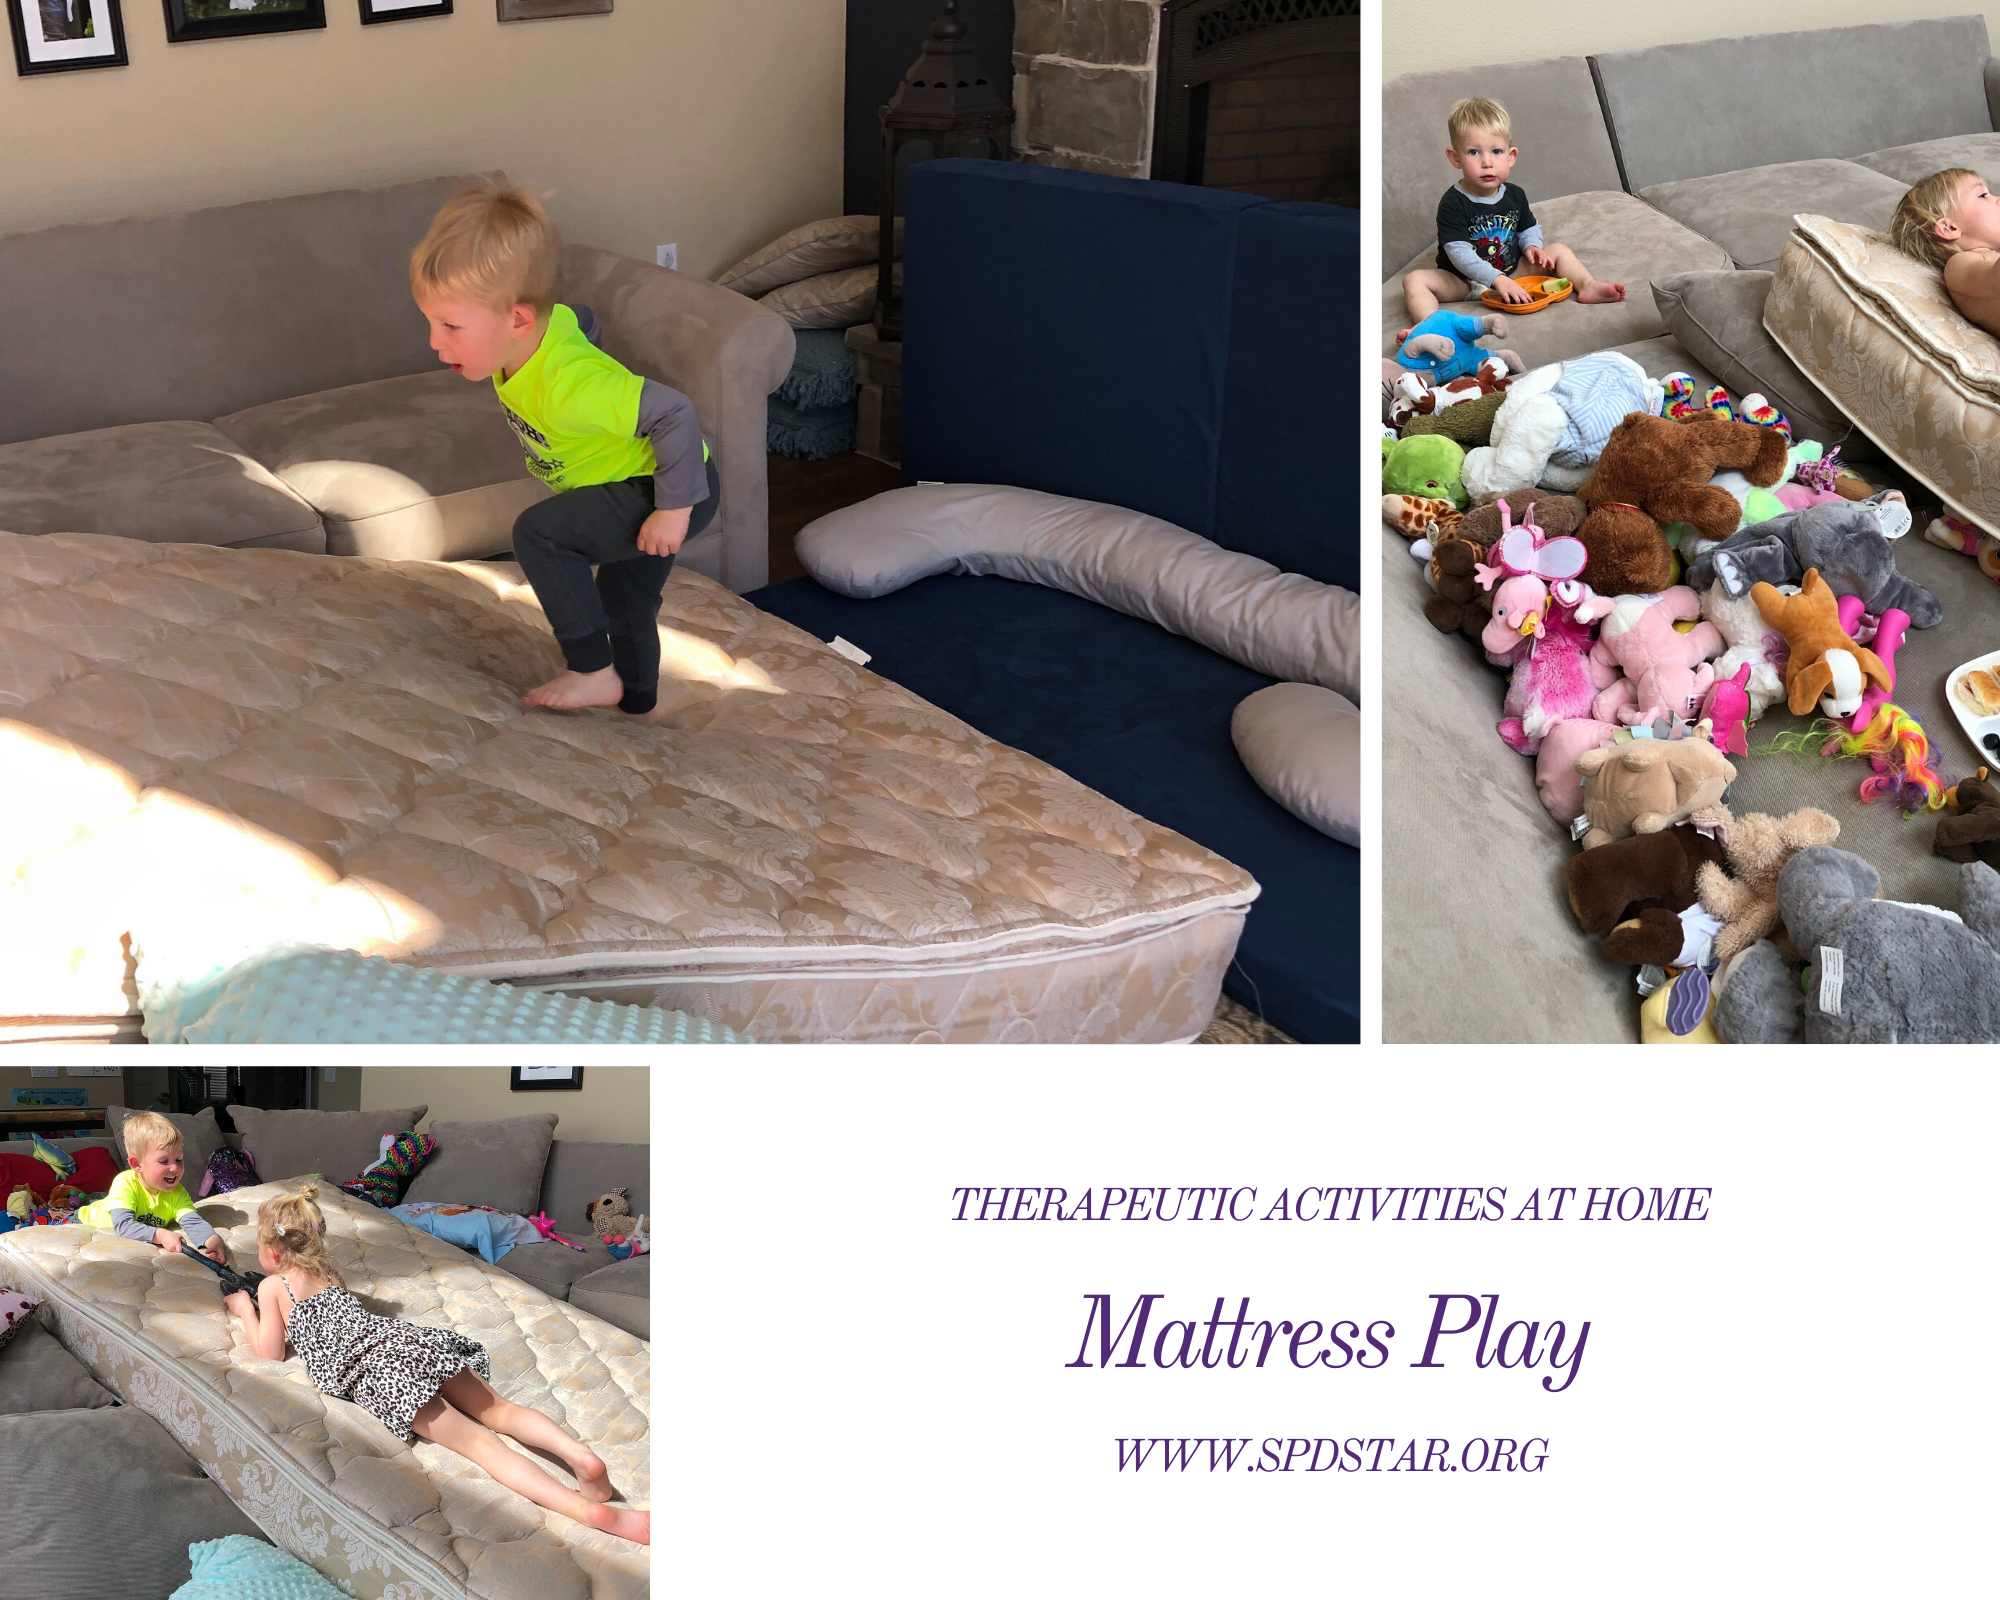 Three ways to play with a mattress at home